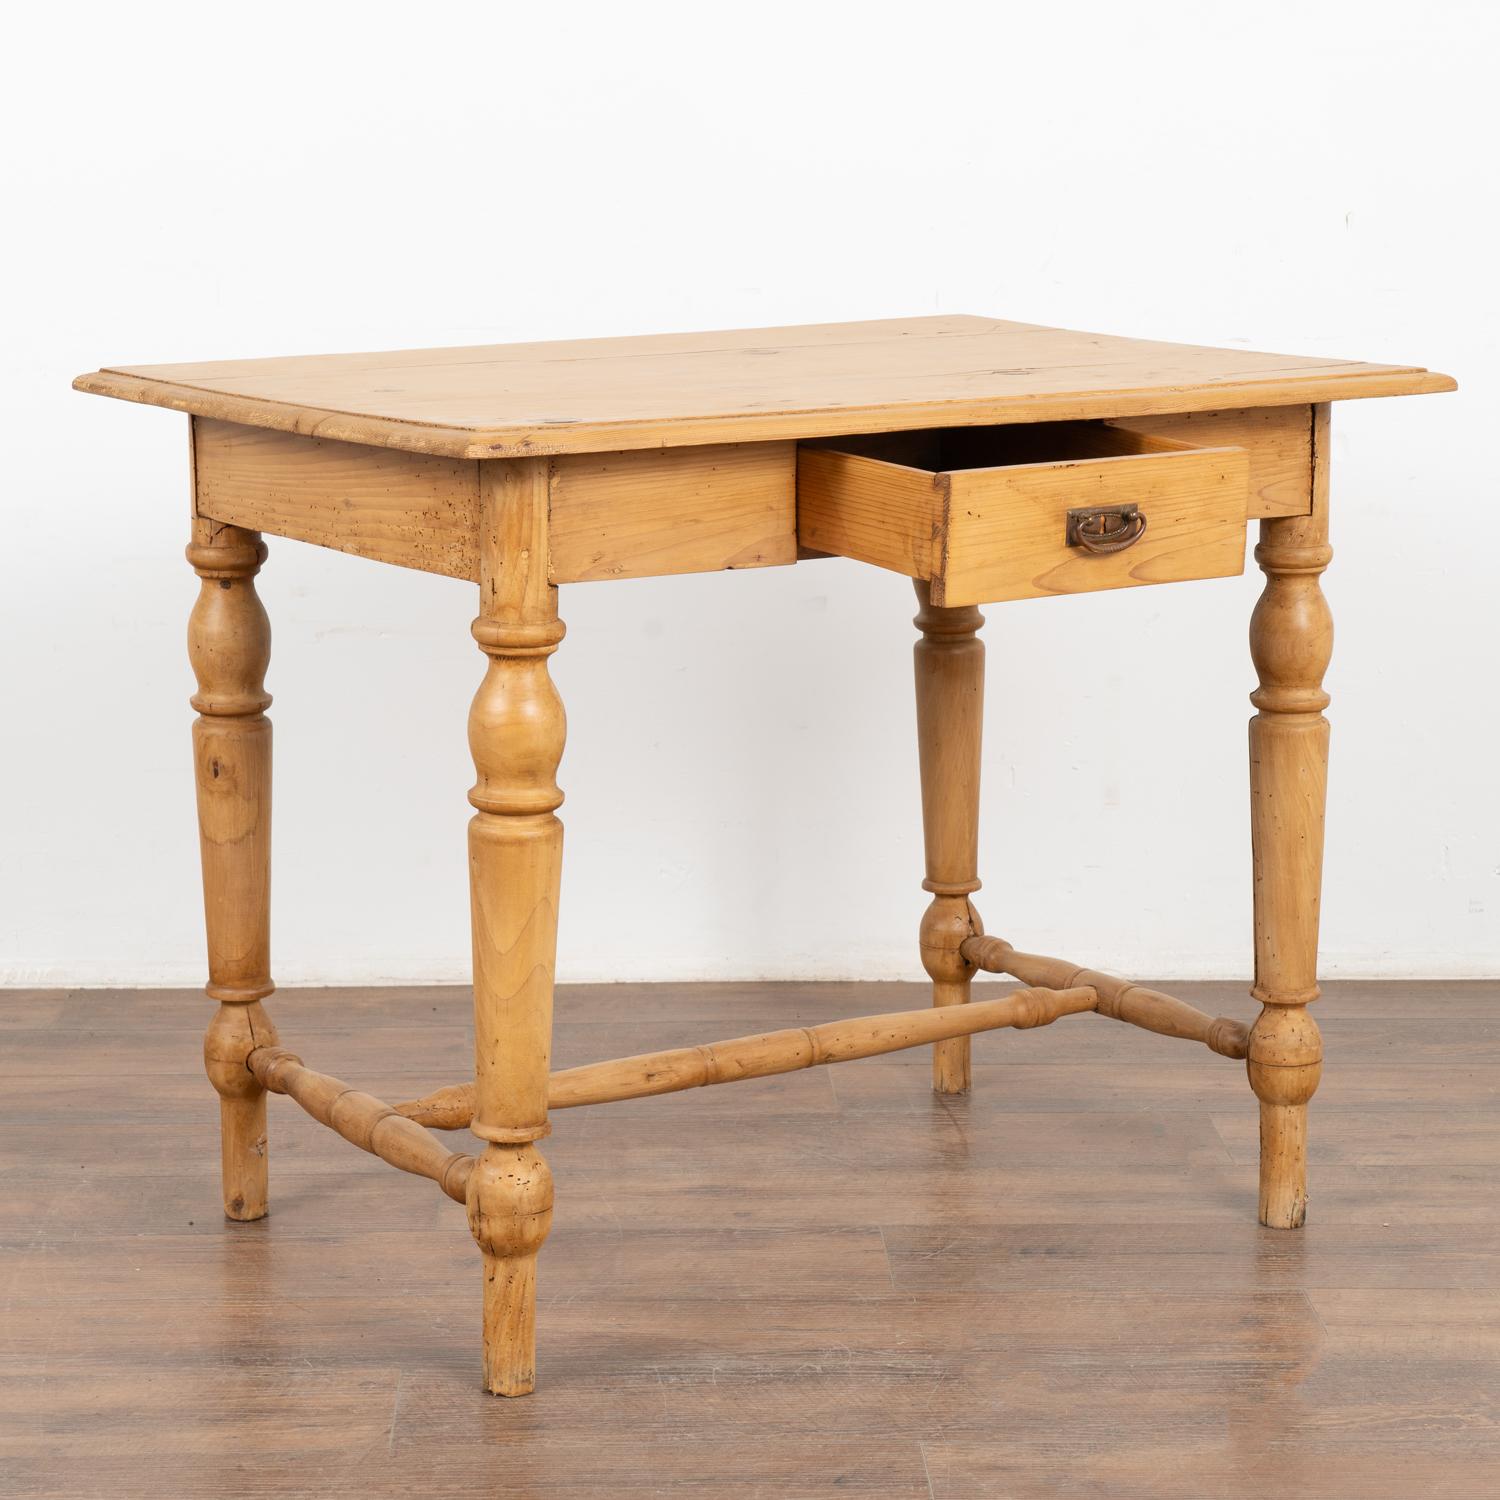 Country Pine Side Table With Turned Legs and Drawer, Denmark circa 1880-1900 For Sale